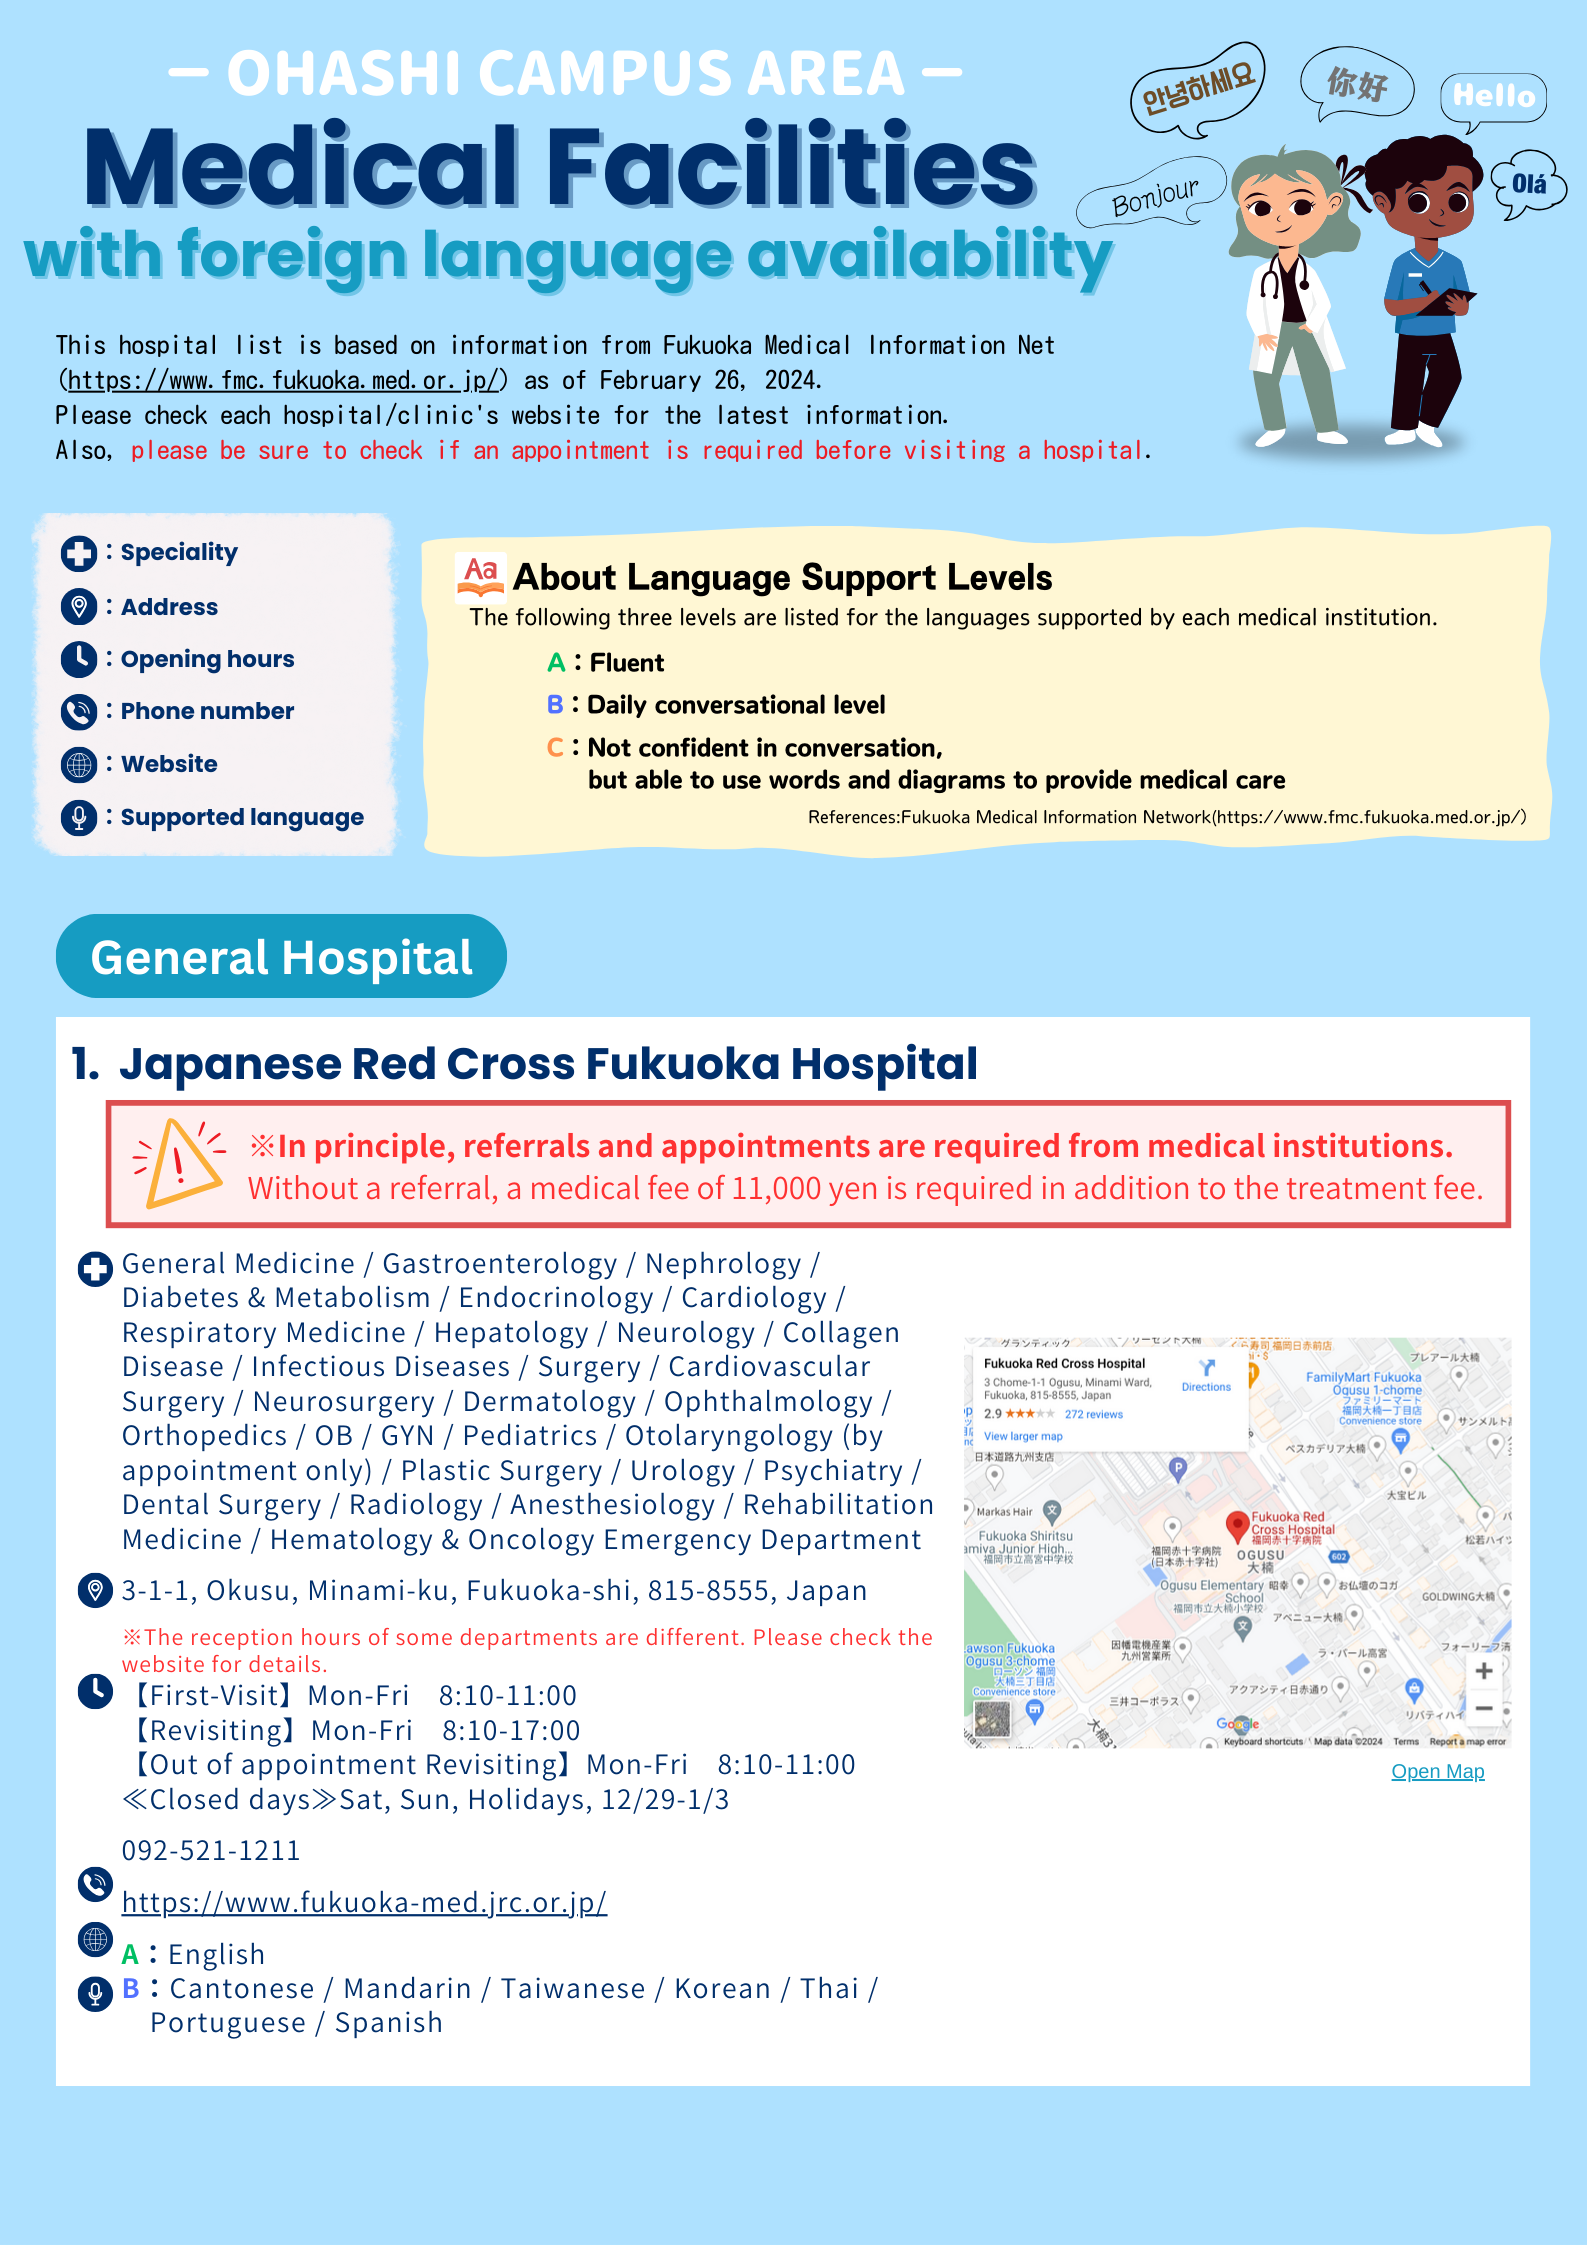 OHASHI-CAMPUS_Medical-Facilities-with-foreign-language-availability